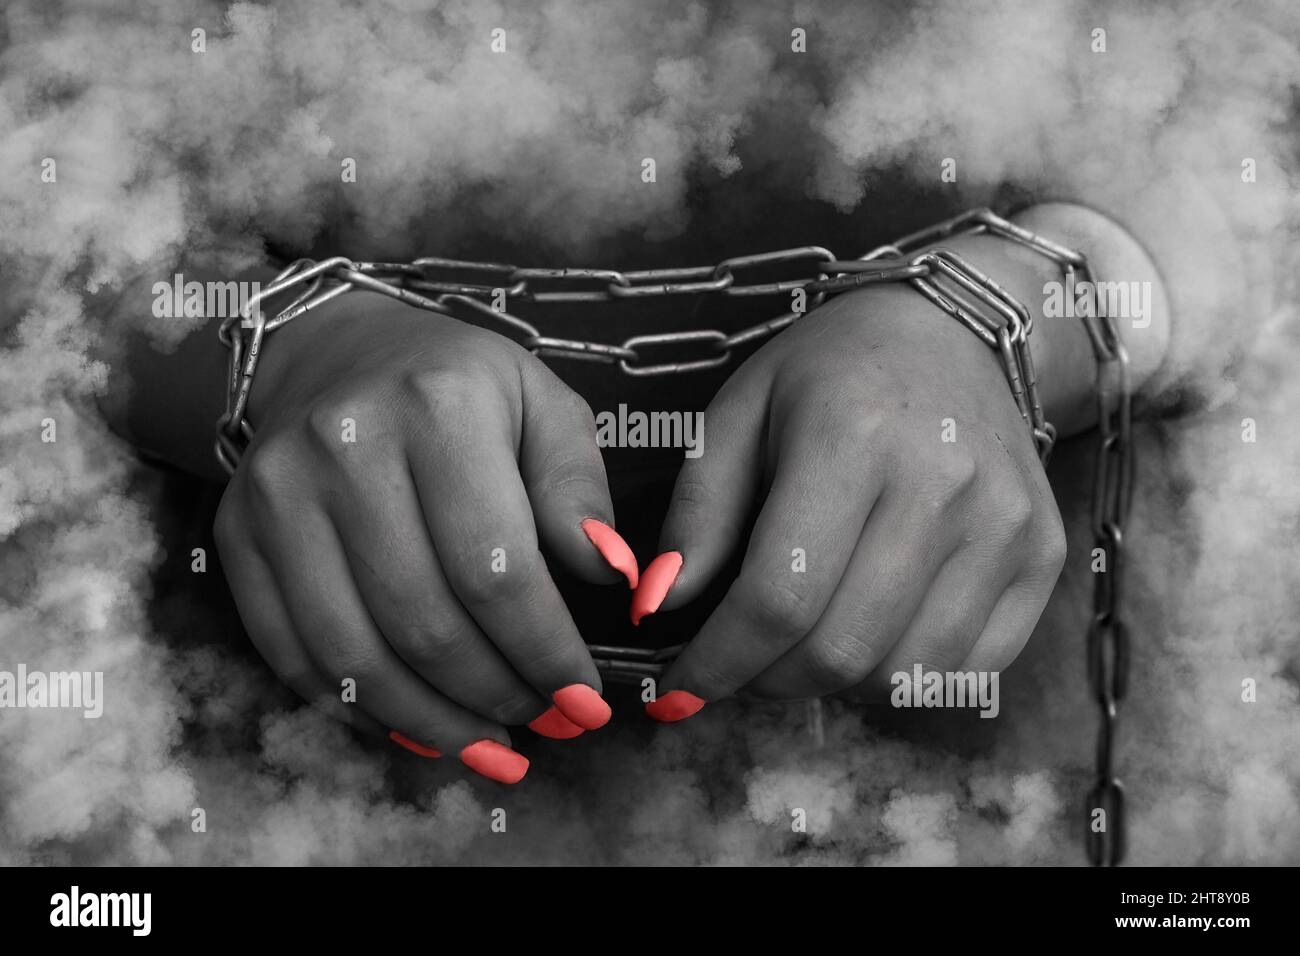 Woman's hands tied with a chain - discolored conceptual photo Stock Photo